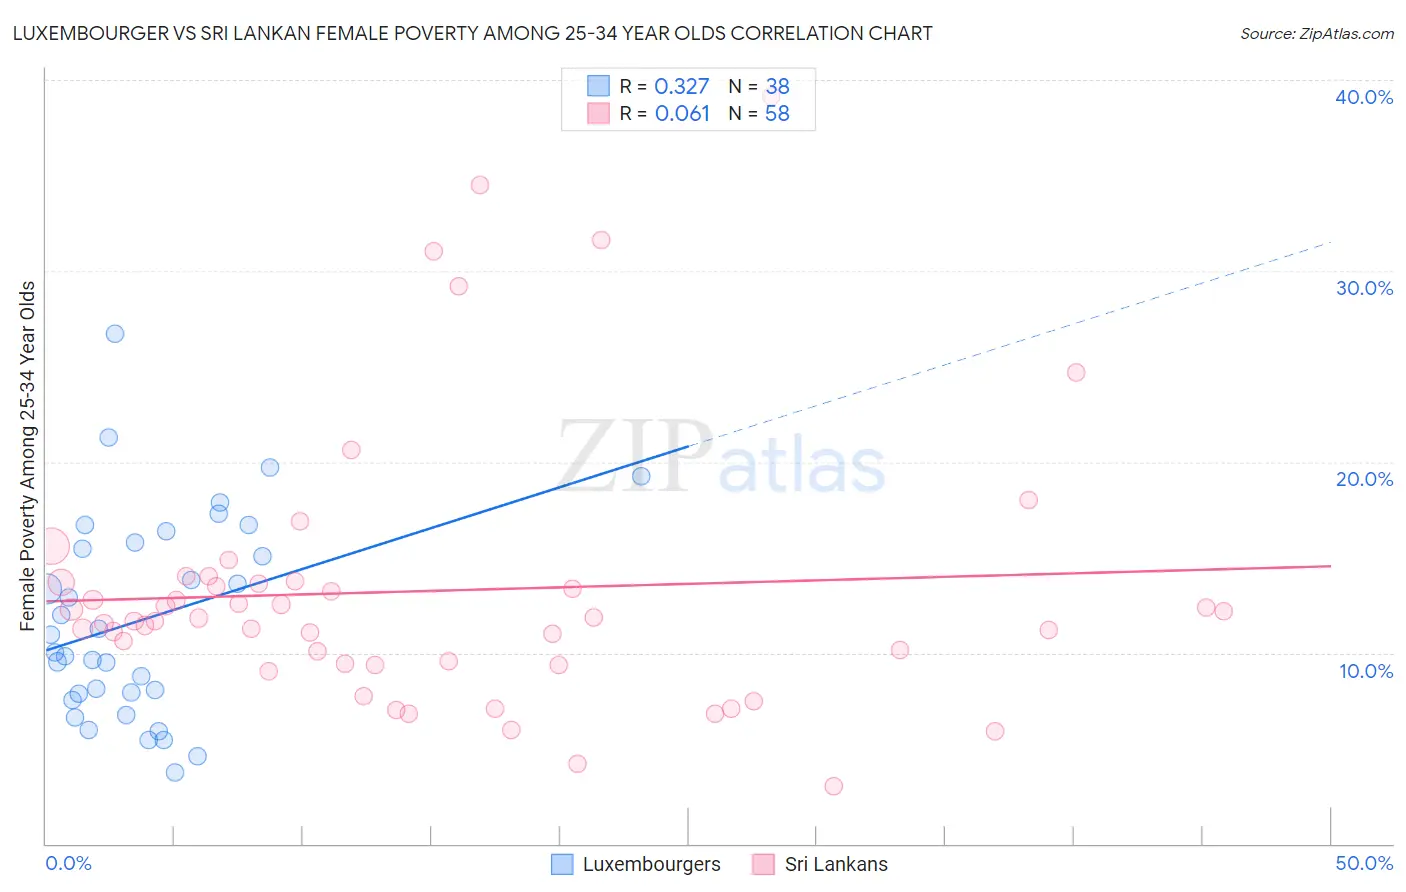 Luxembourger vs Sri Lankan Female Poverty Among 25-34 Year Olds